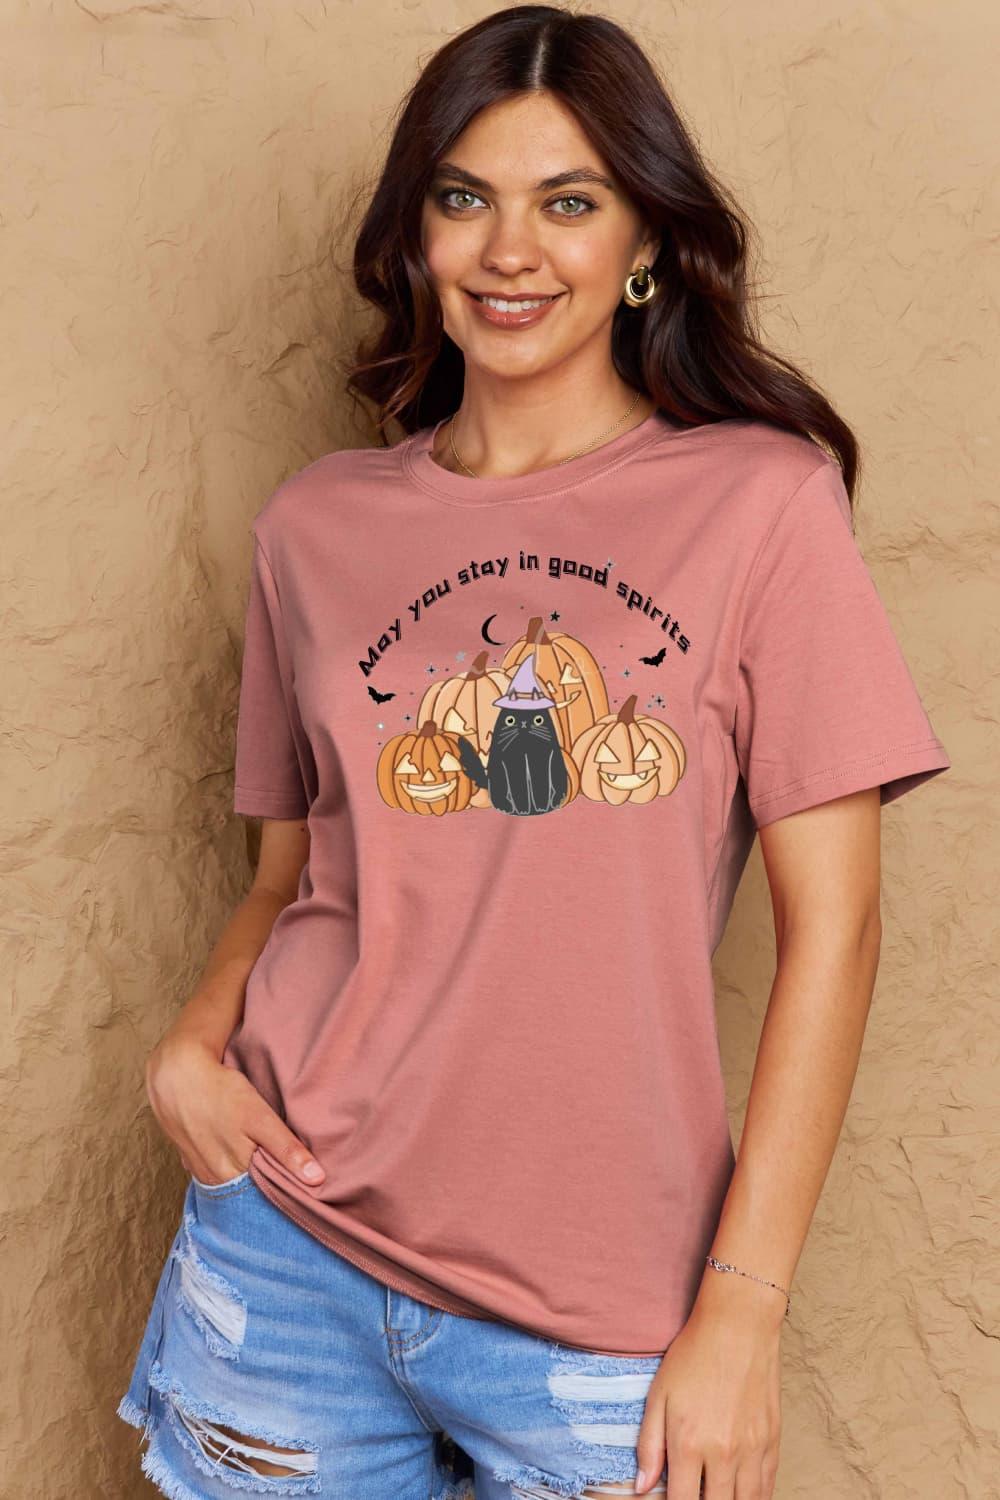 Simply Love Full Size MAY YOU STAY IN GOOD SPIRITS Graphic Cotton T-Shirt - Vesteeto